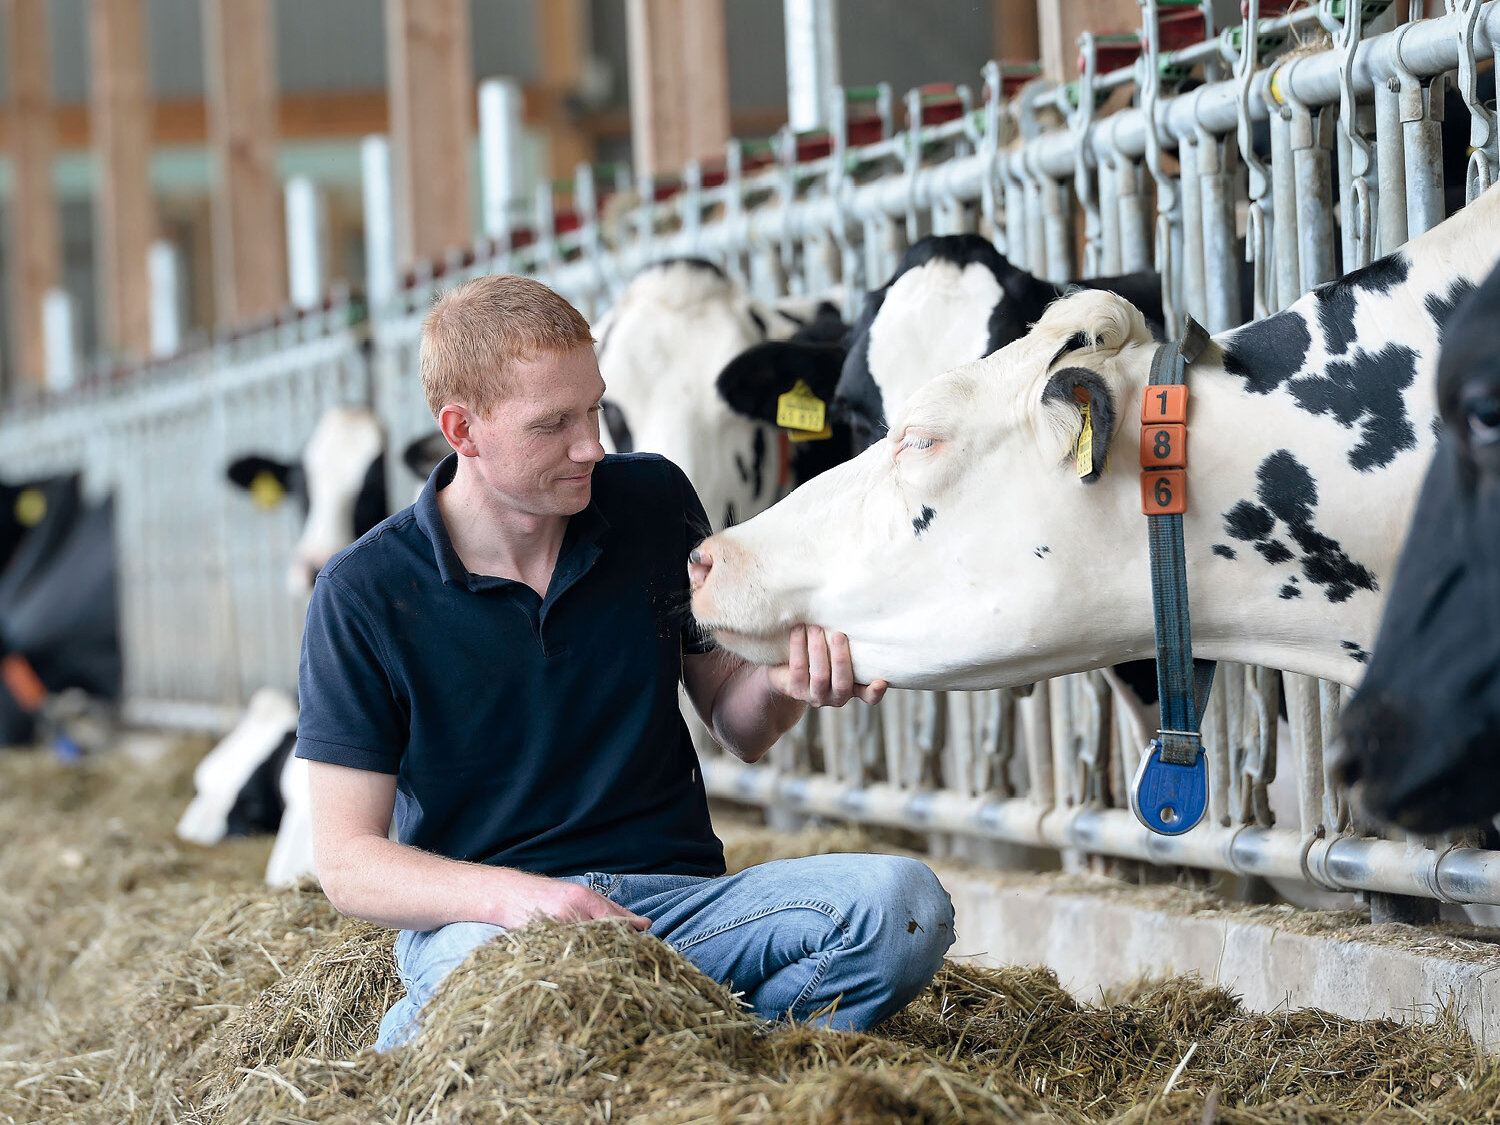 Image of a farmer in the cowshed